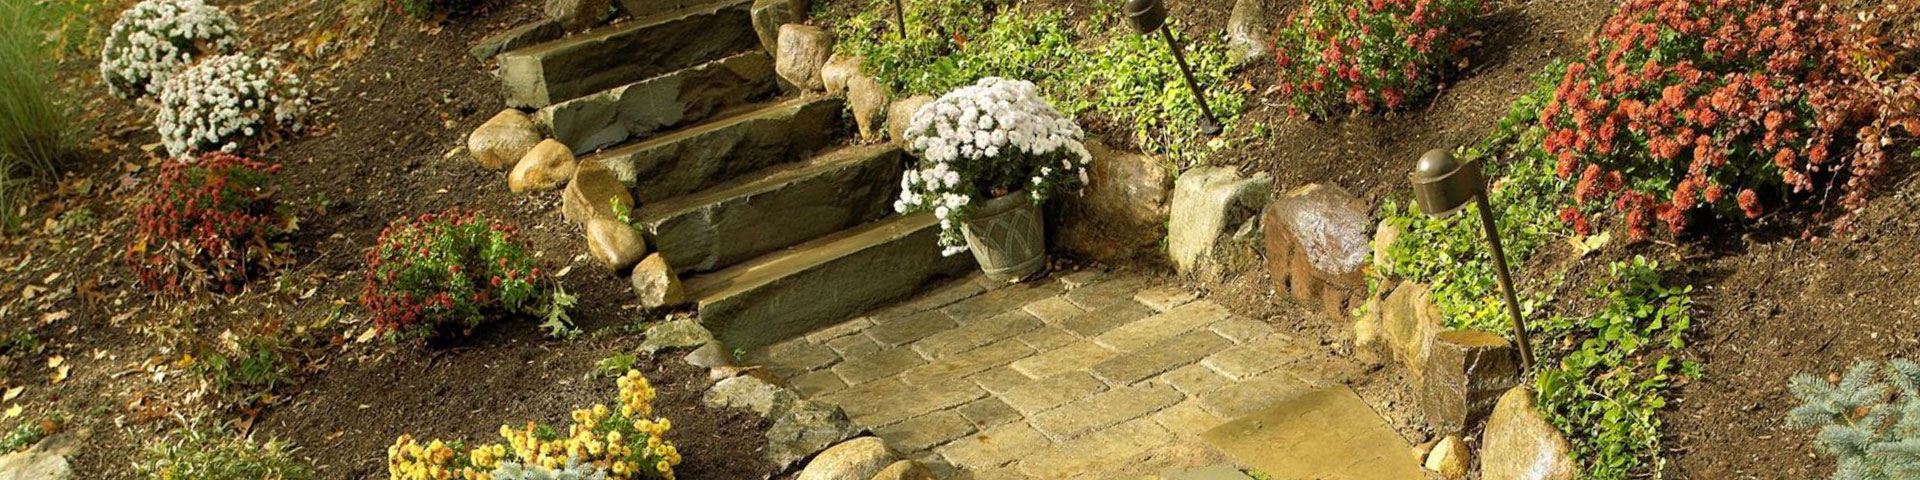 garden stair with steppers